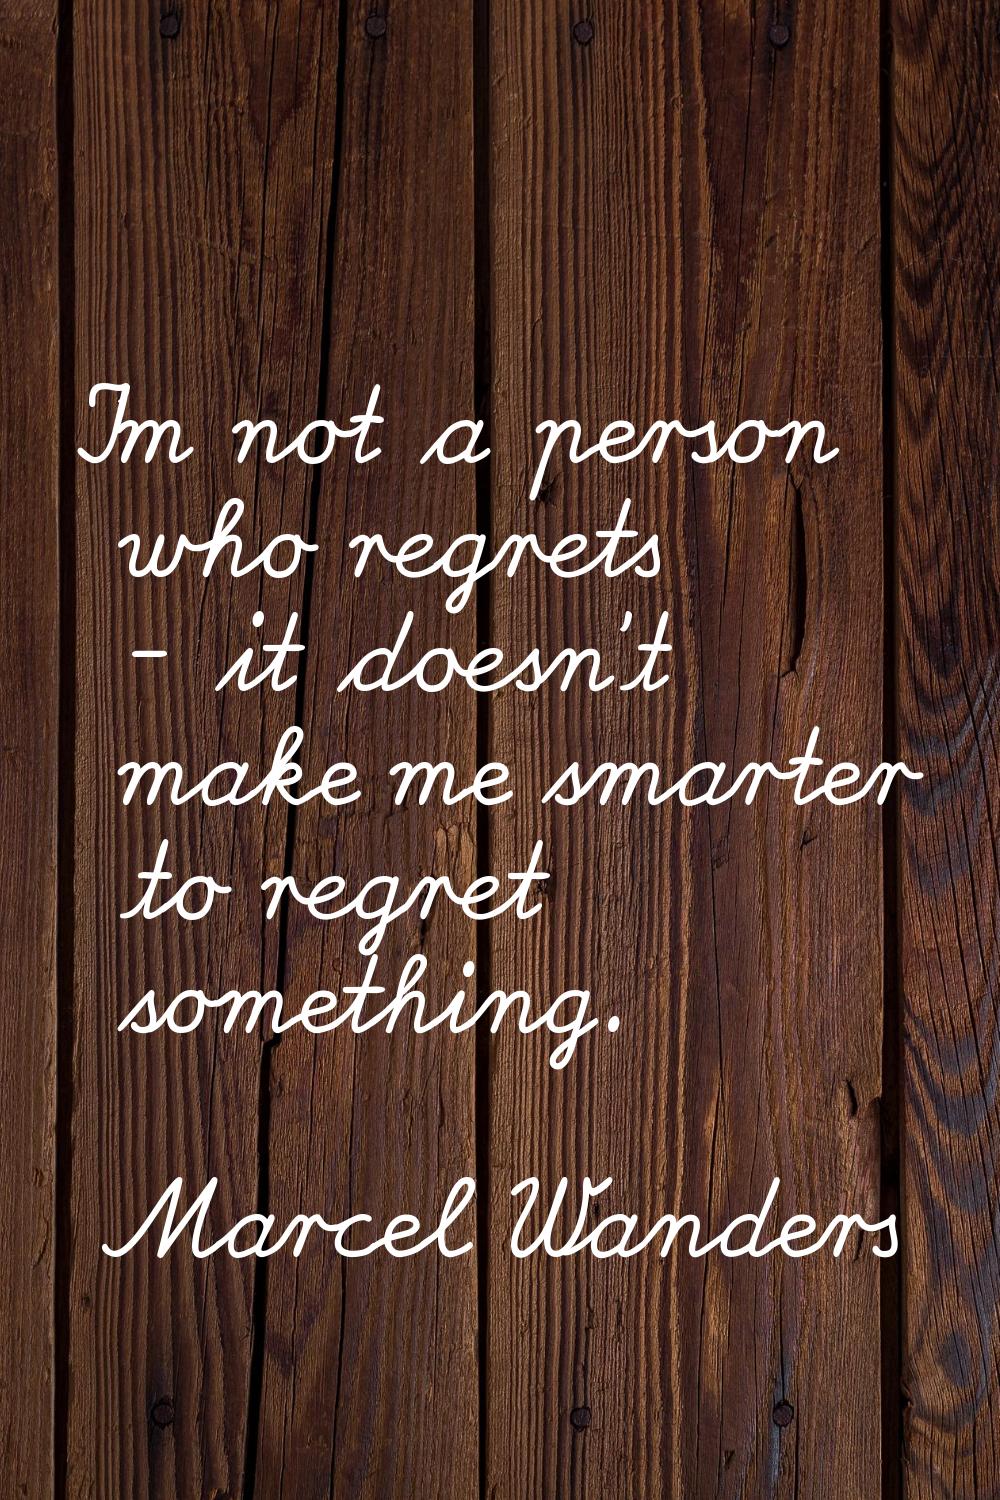 I'm not a person who regrets - it doesn't make me smarter to regret something.